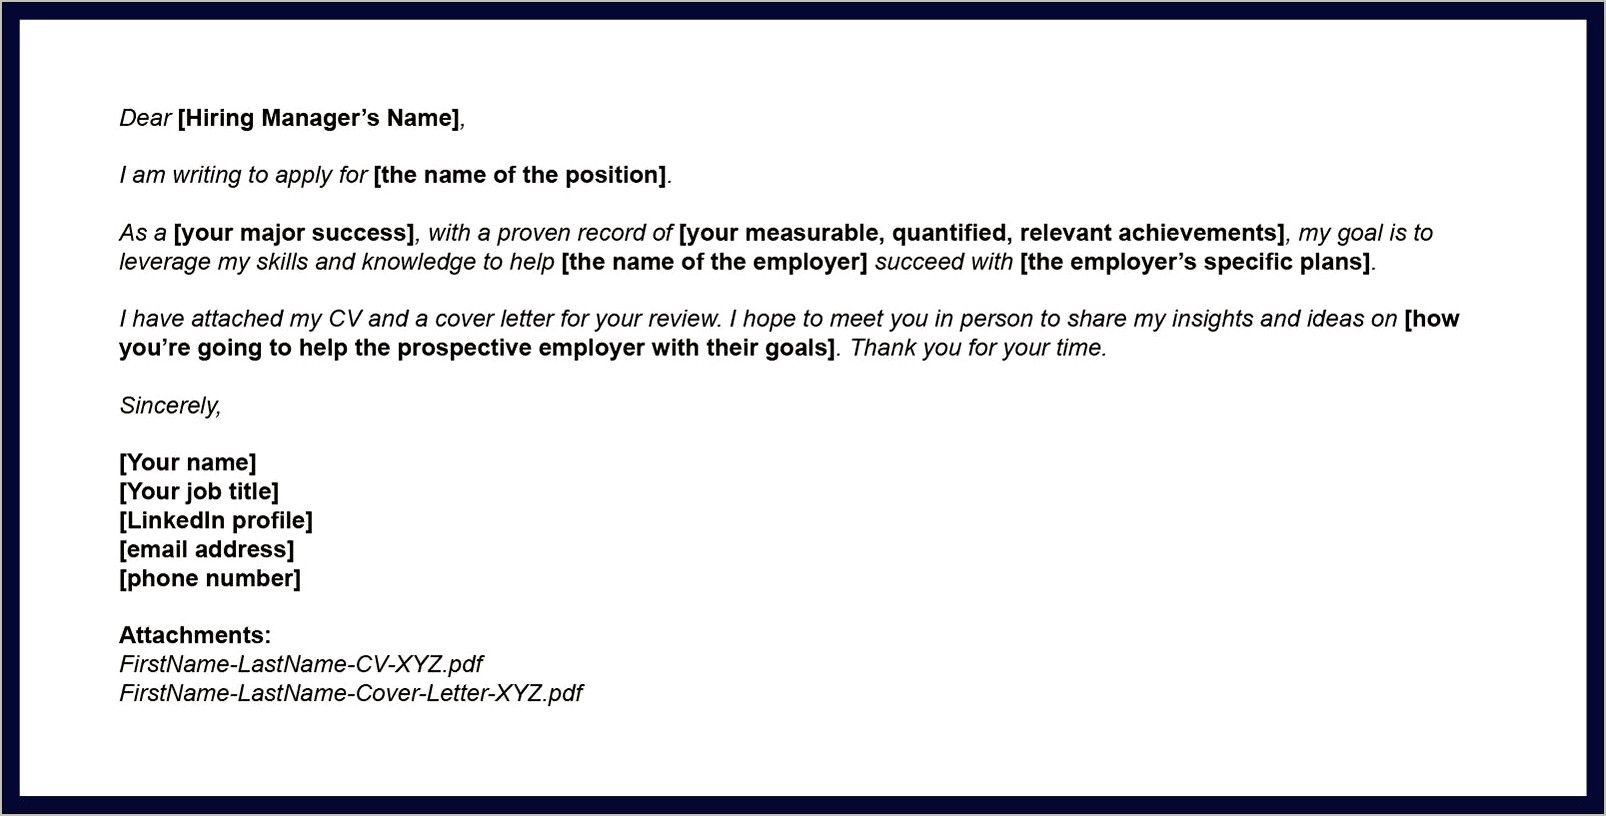 Sample For Emailing A Resume